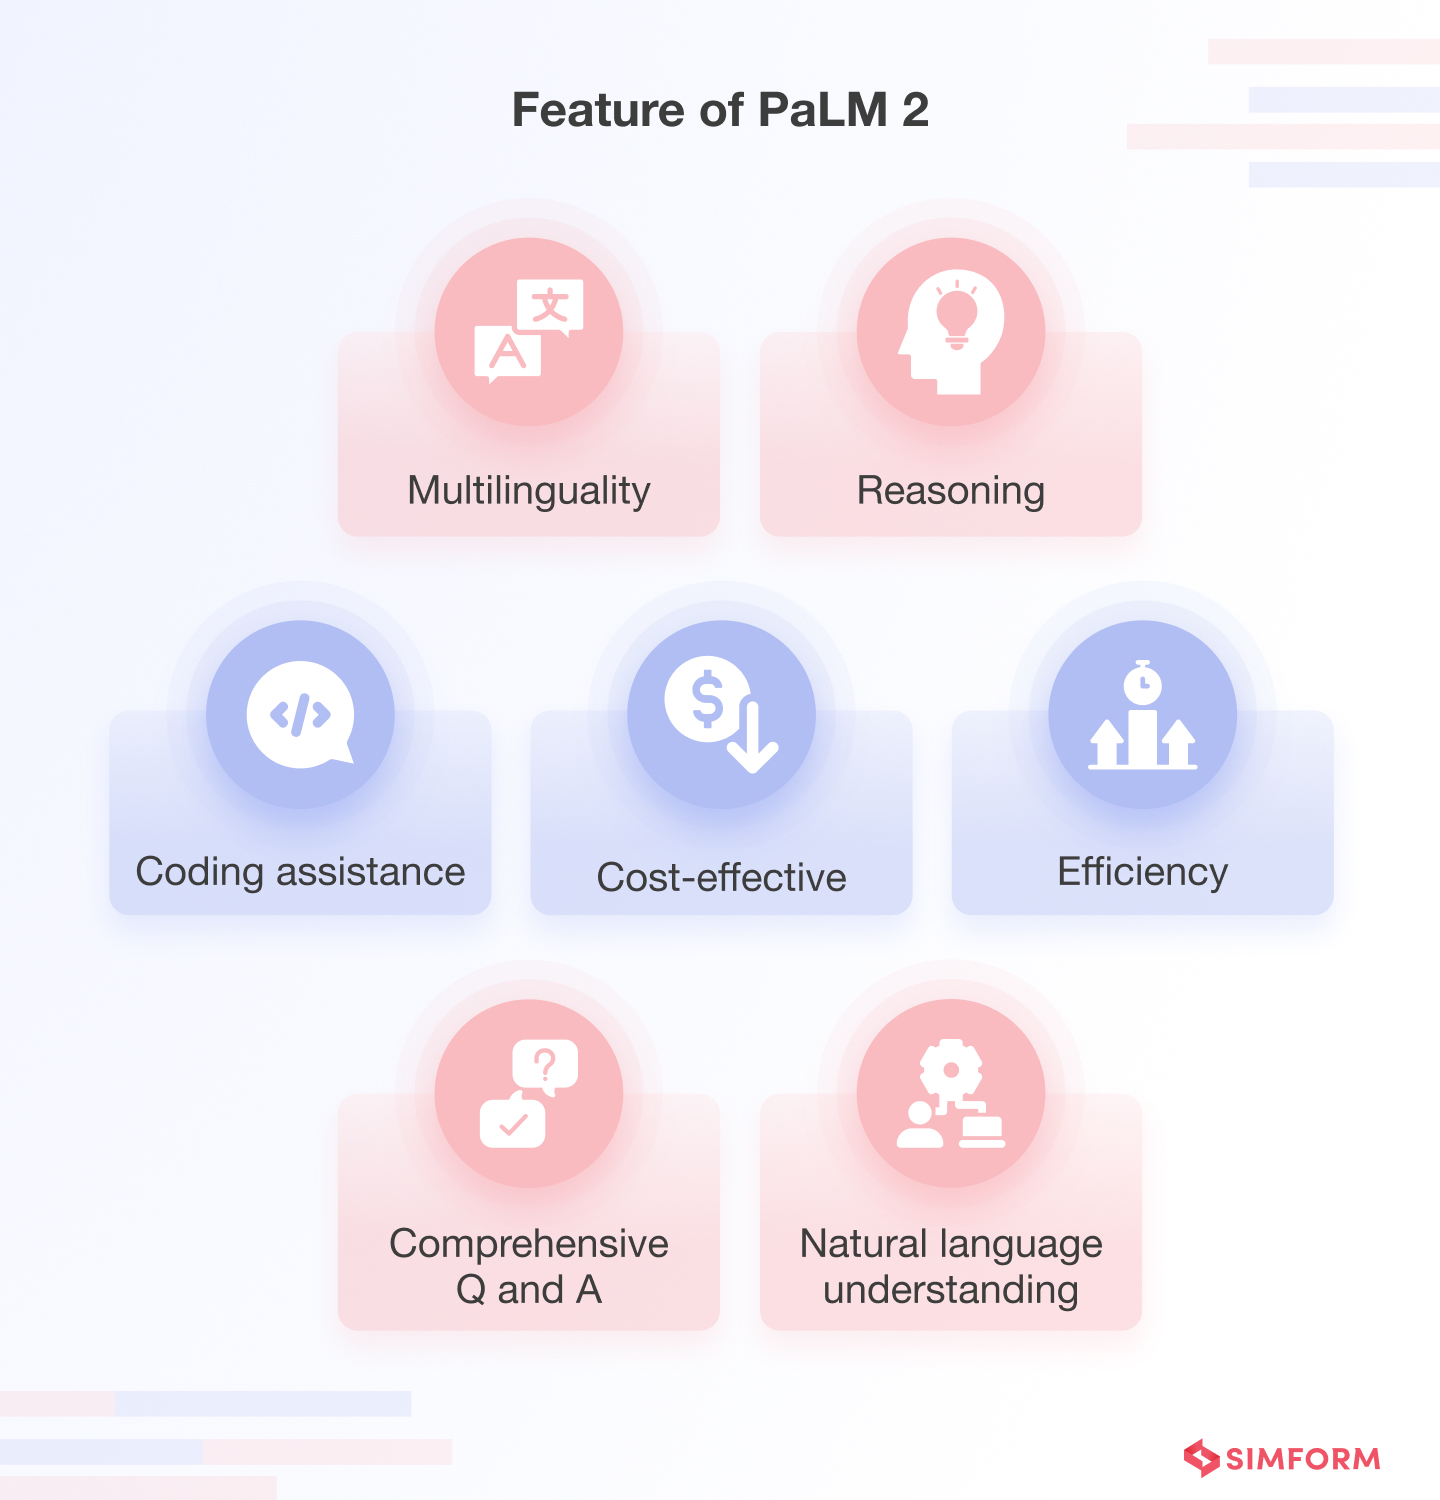 Features of PaLM 2